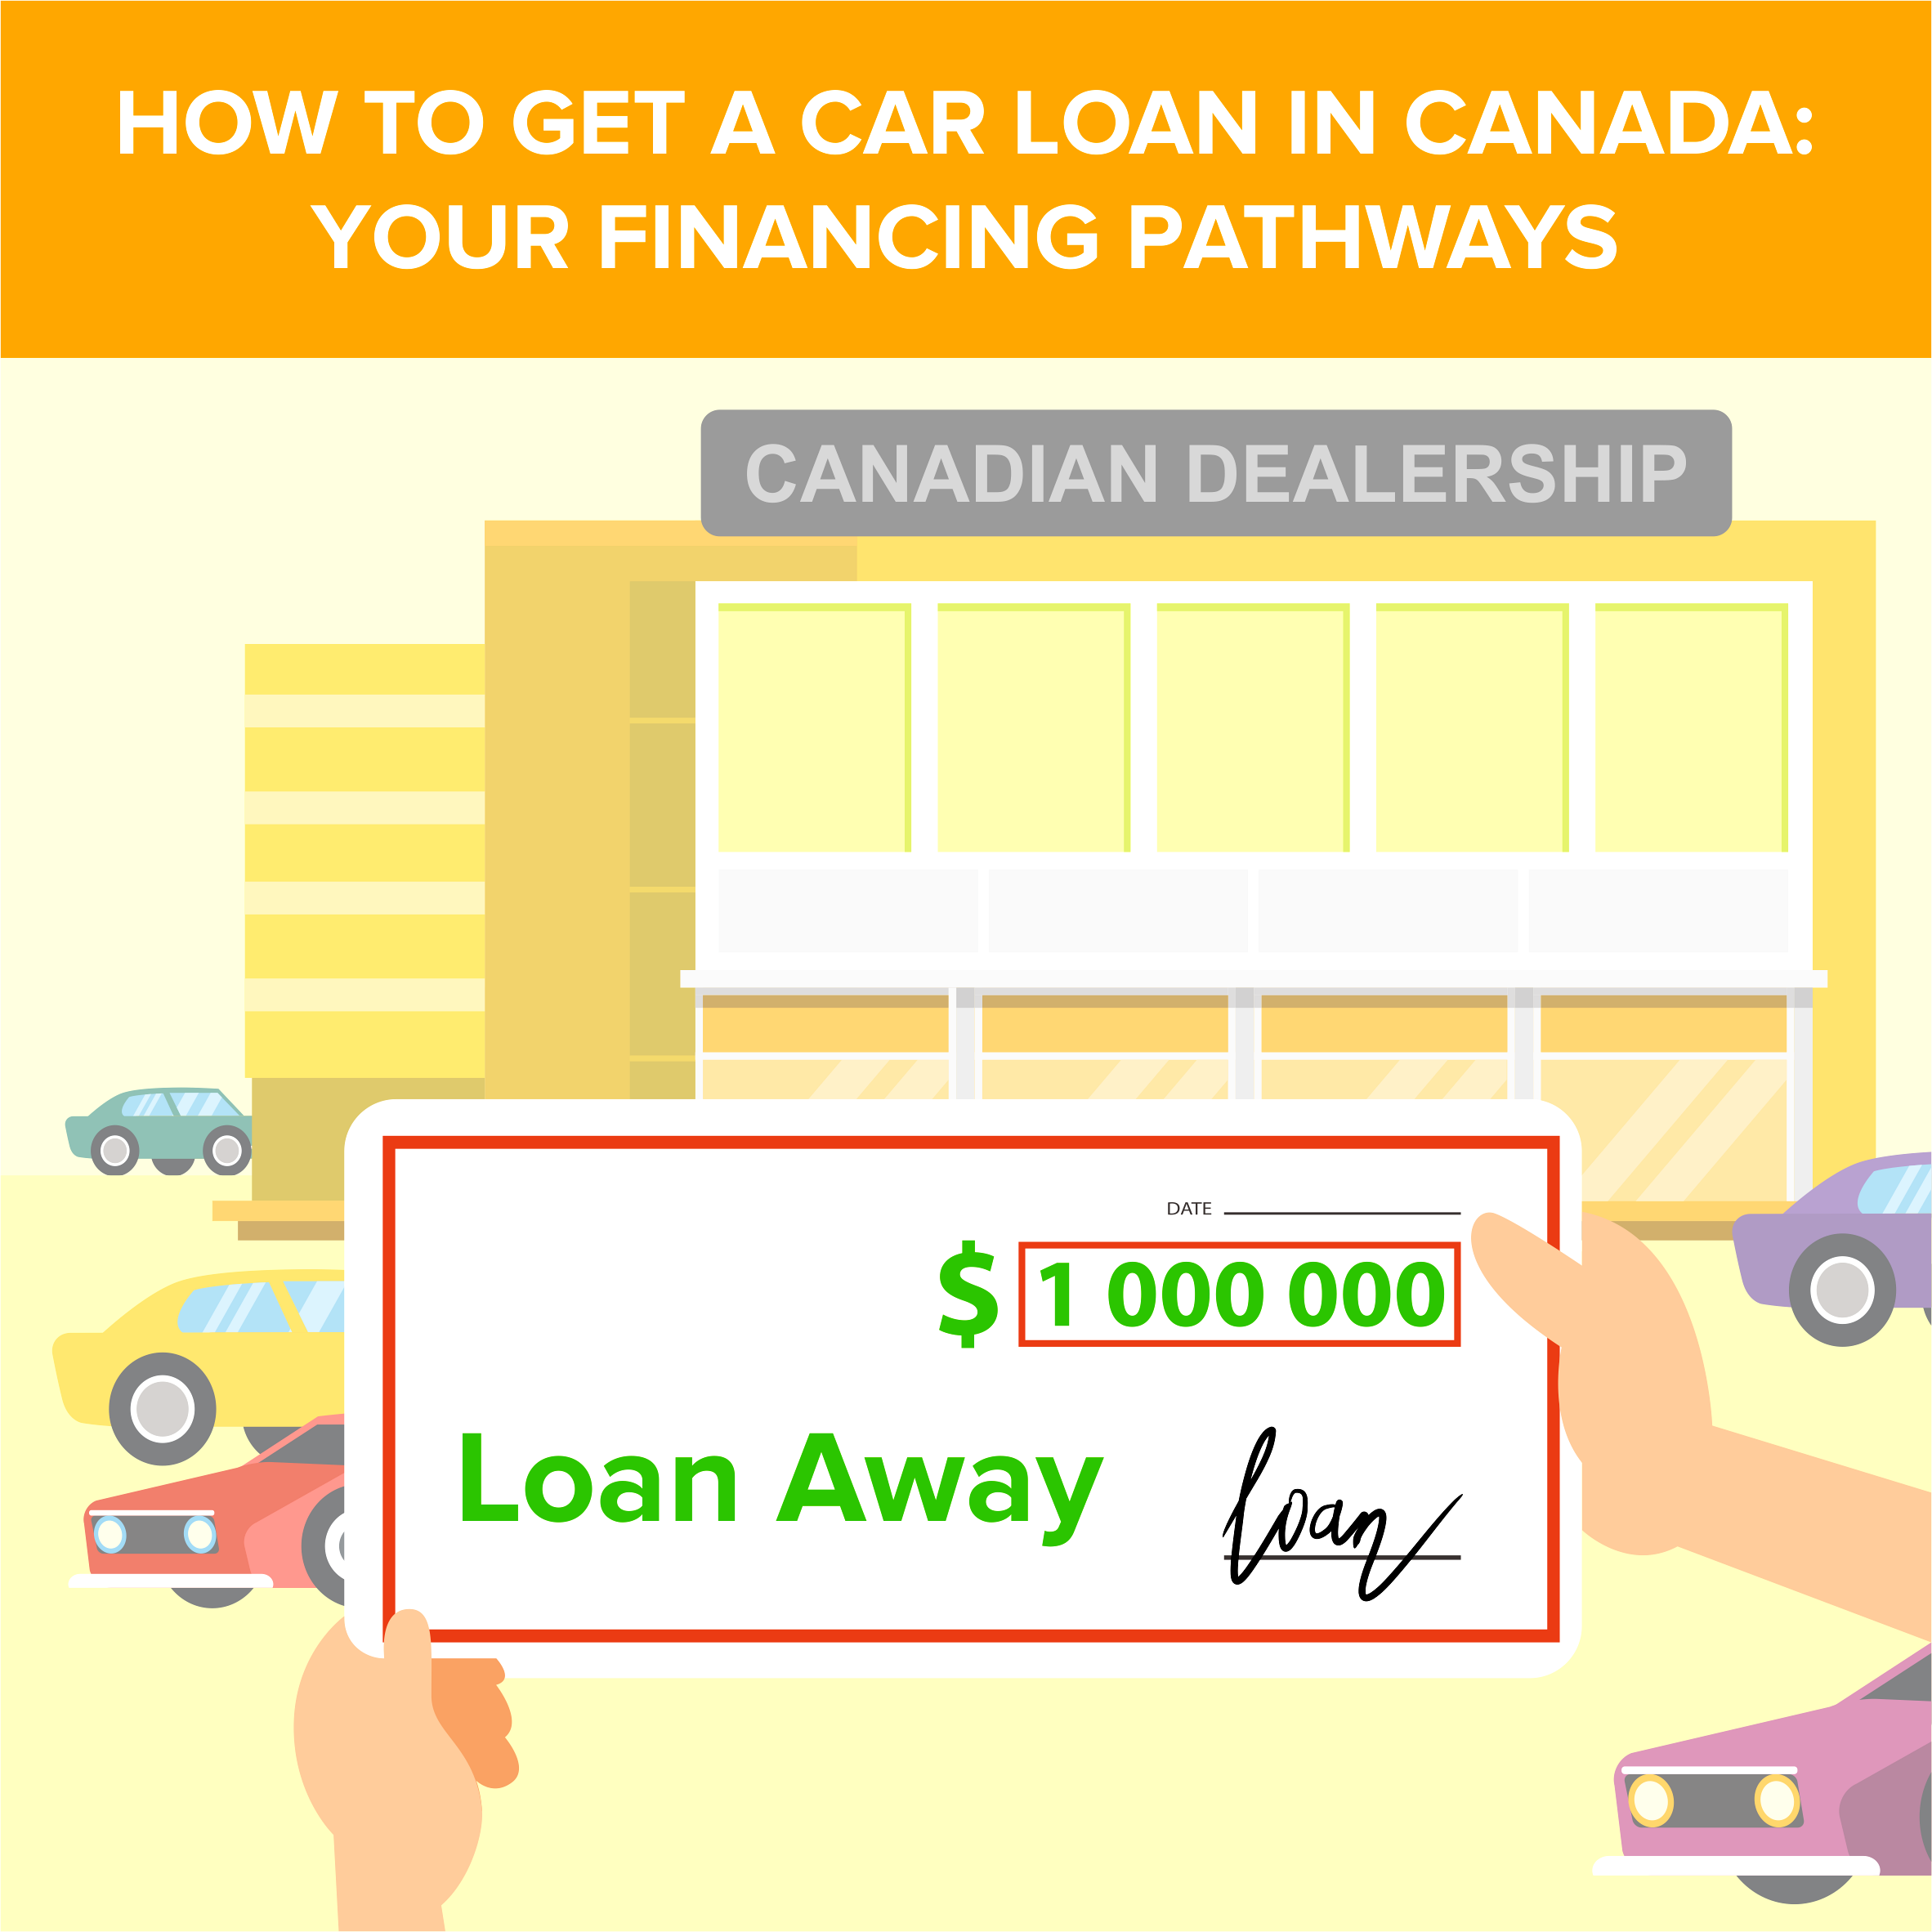 How to Get a Car Loan in Canada: Your Financing Pathways